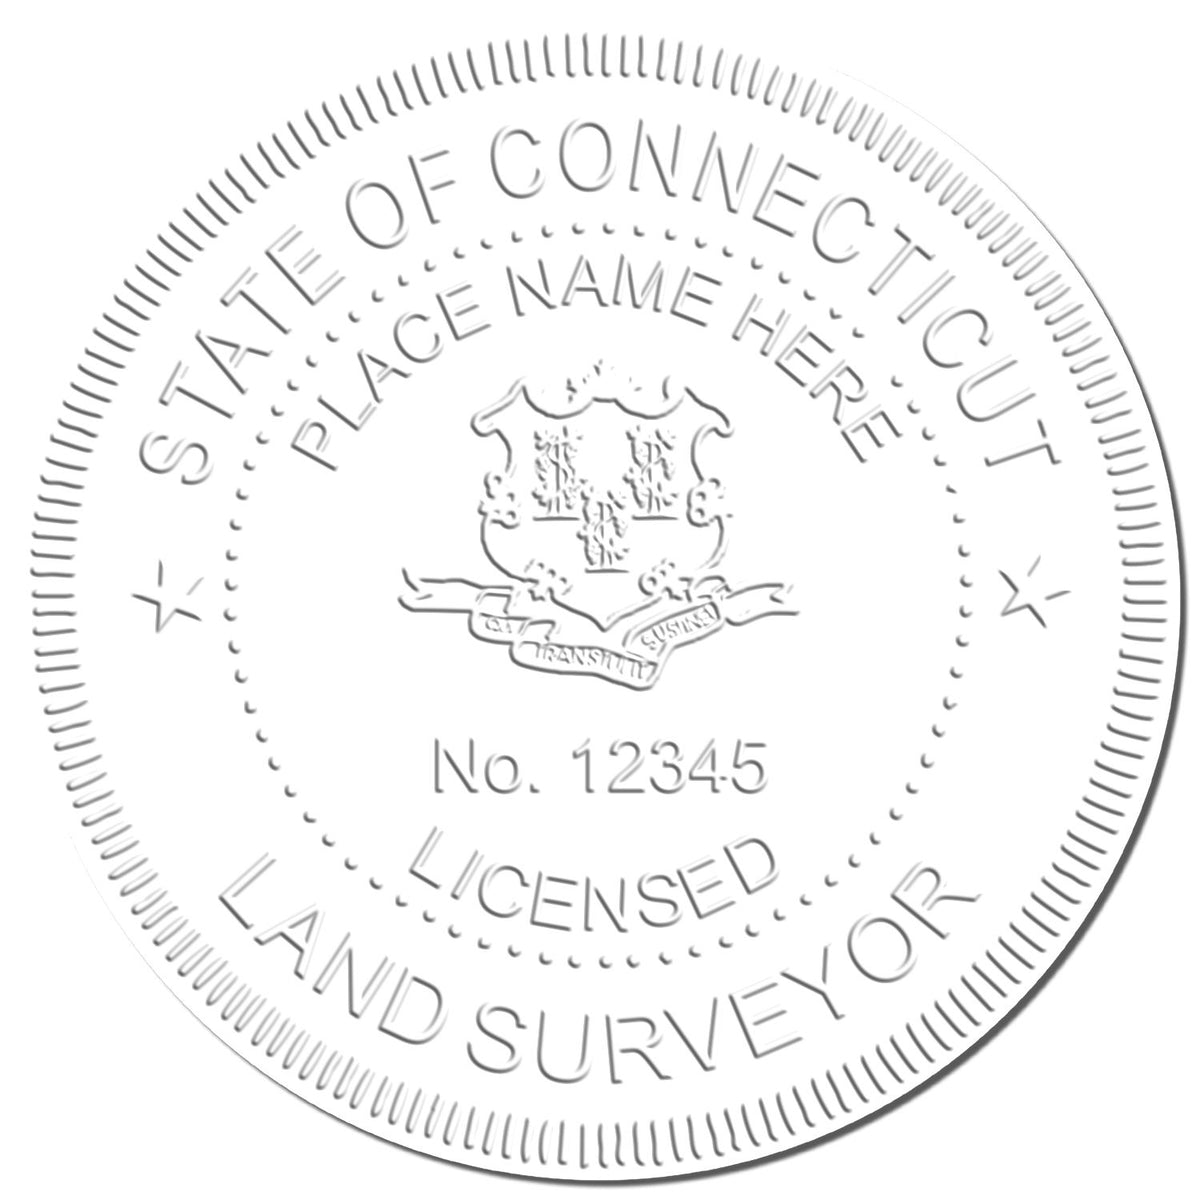 This paper is stamped with a sample imprint of the Long Reach Connecticut Land Surveyor Seal, signifying its quality and reliability.